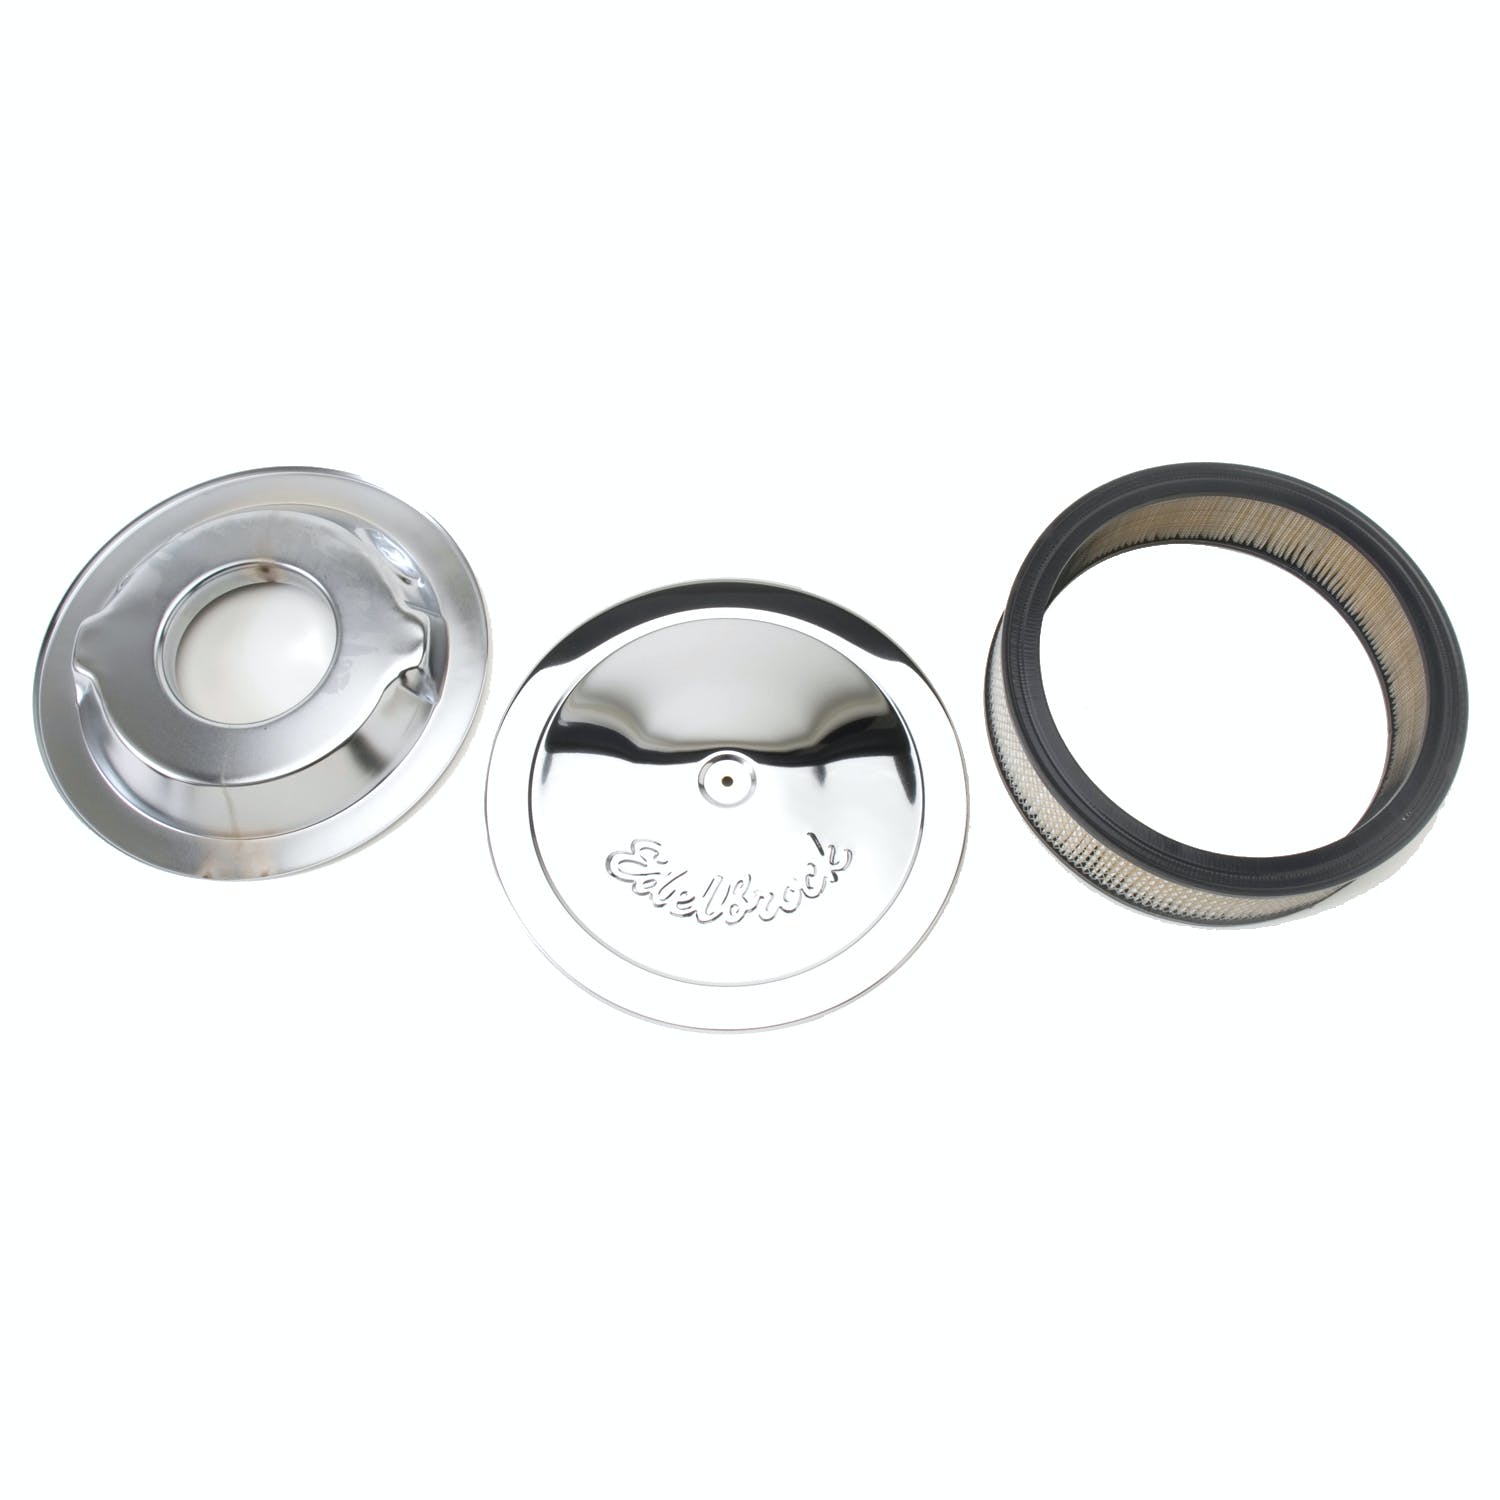 Edelbrock 1221 Pro-Flo Chrome 14 Round Air Cleaner with 3 Paper Element (Deep Flange)